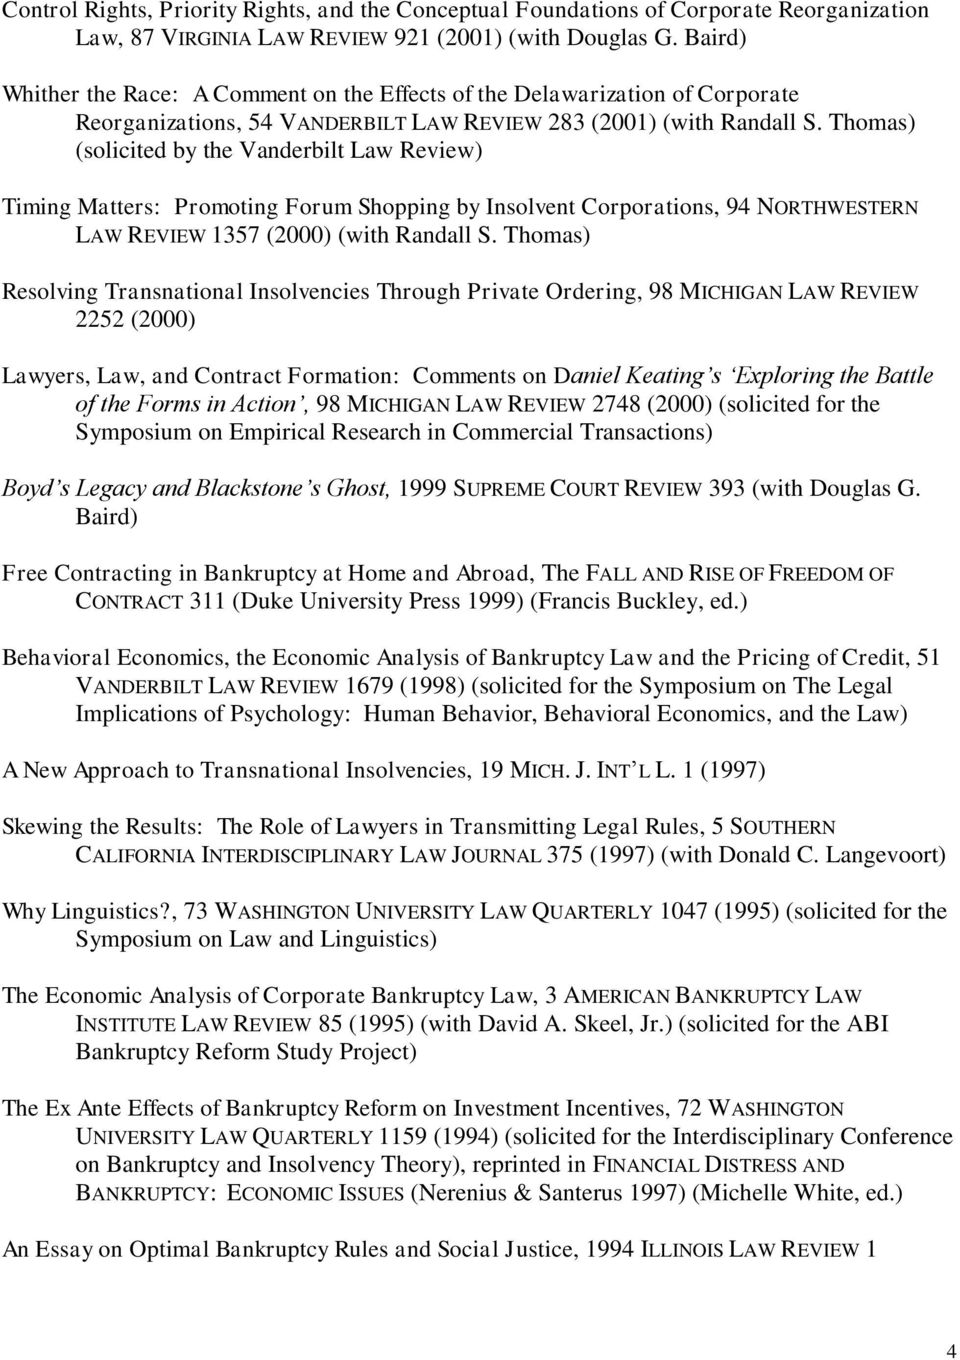 Thomas) (solicited by the Vanderbilt Law Review) Timing Matters: Promoting Forum Shopping by Insolvent Corporations, 94 NORTHWESTERN LAW REVIEW 1357 (2000) (with Randall S.